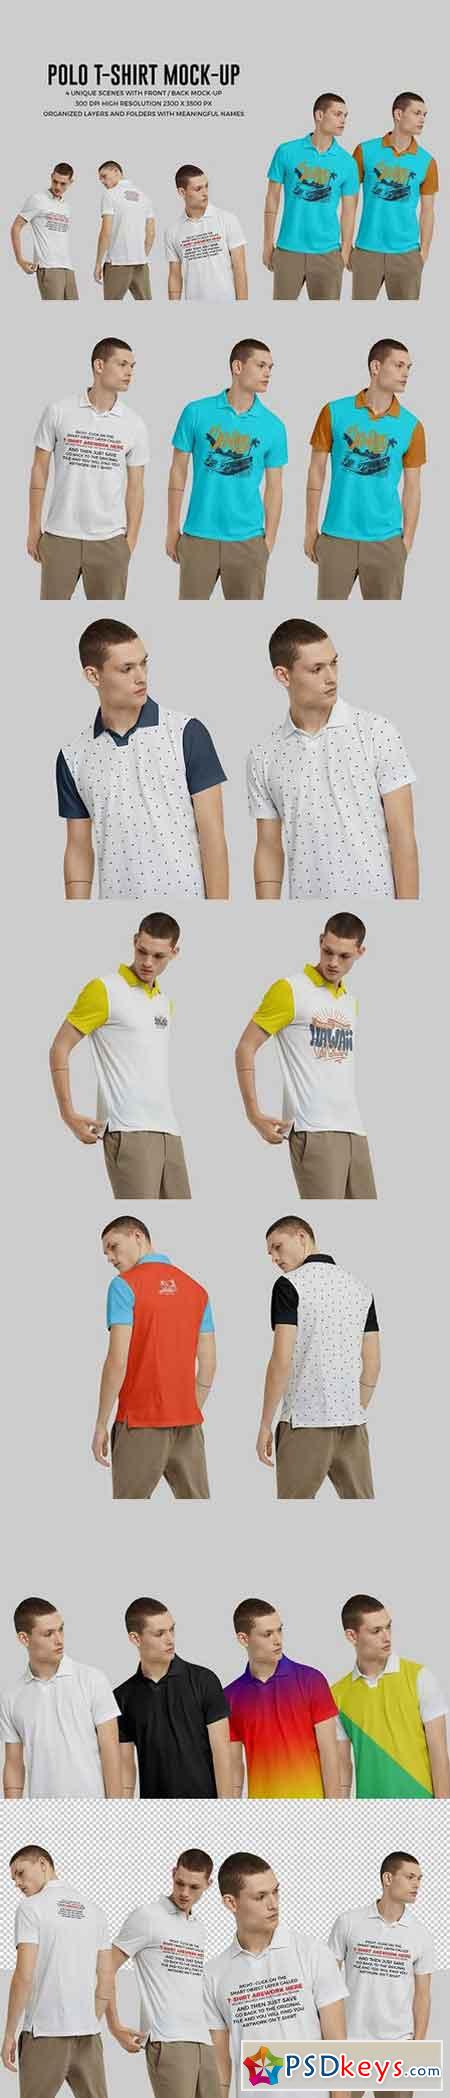 Polo Shirt Mock-Up 1482354 » Free Download Photoshop Vector Stock image ...